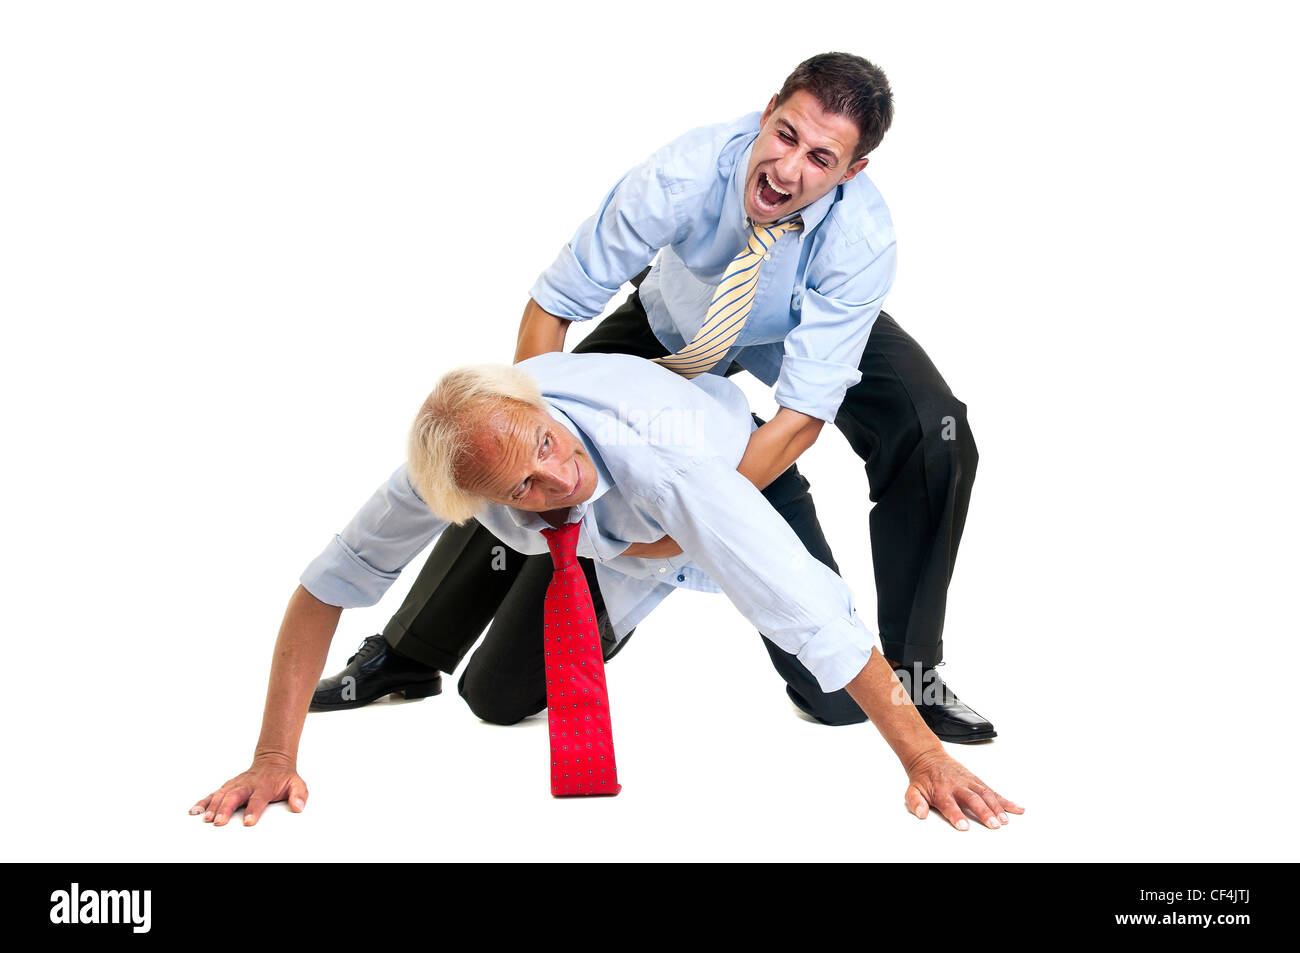 To businessmen wrestling isolated against a white background Stock Photo